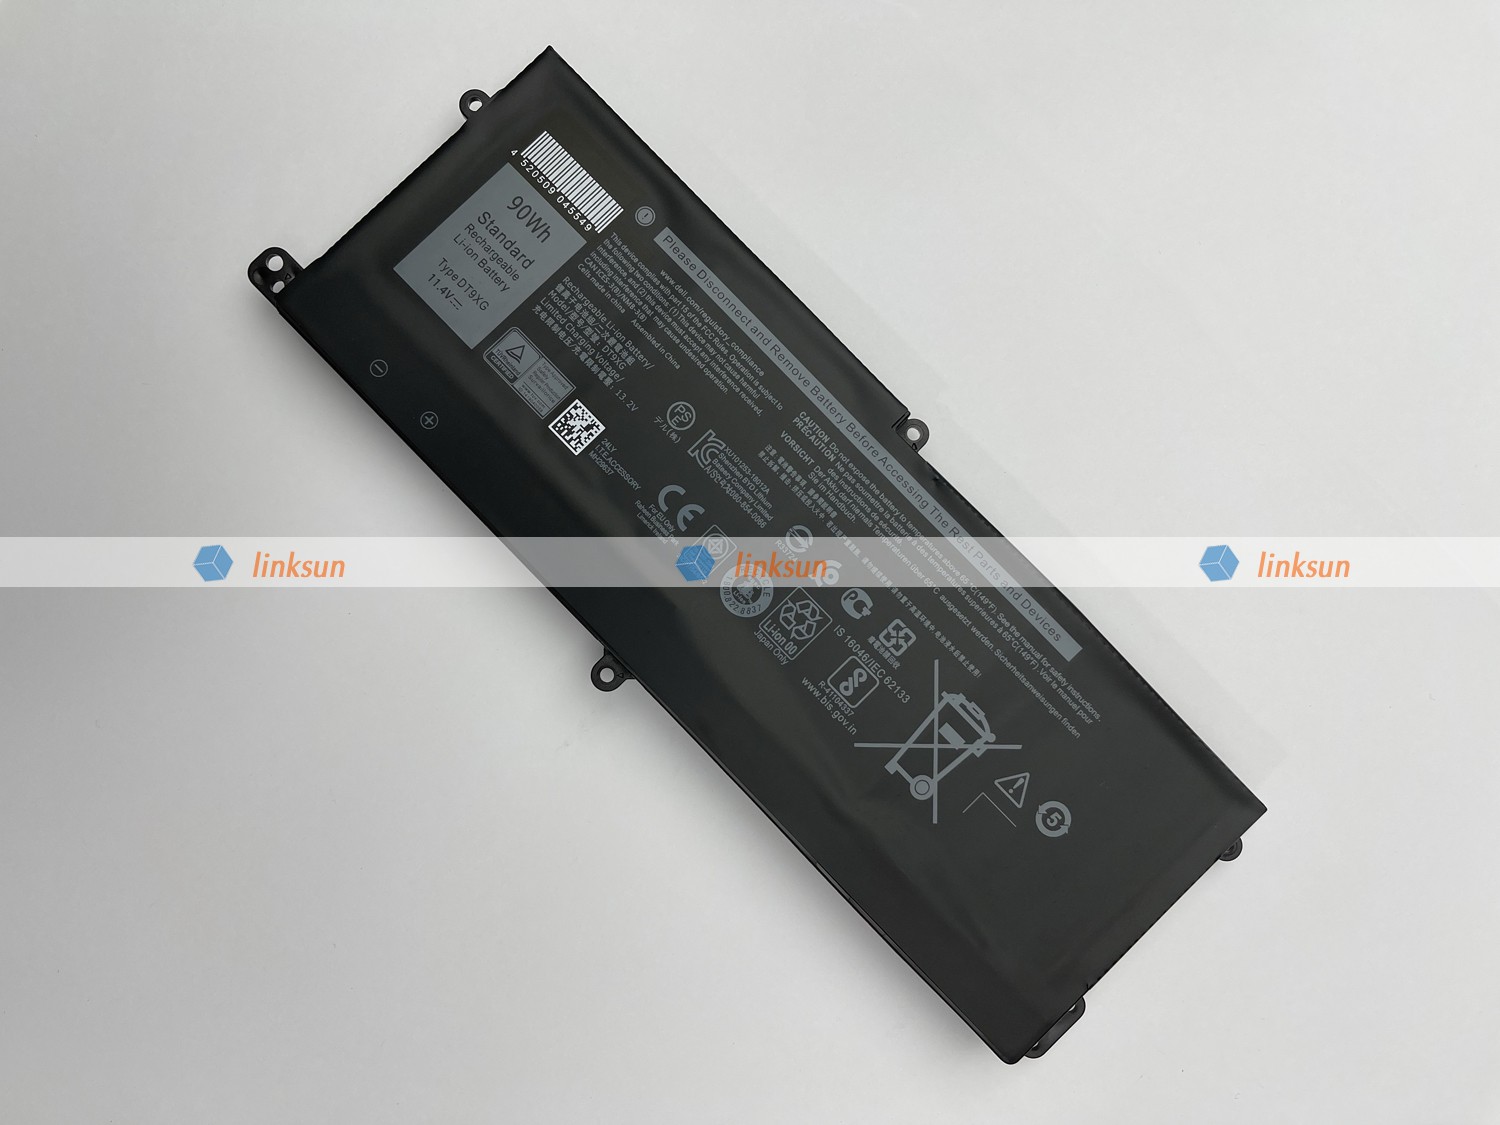 DT9XG battery inclined